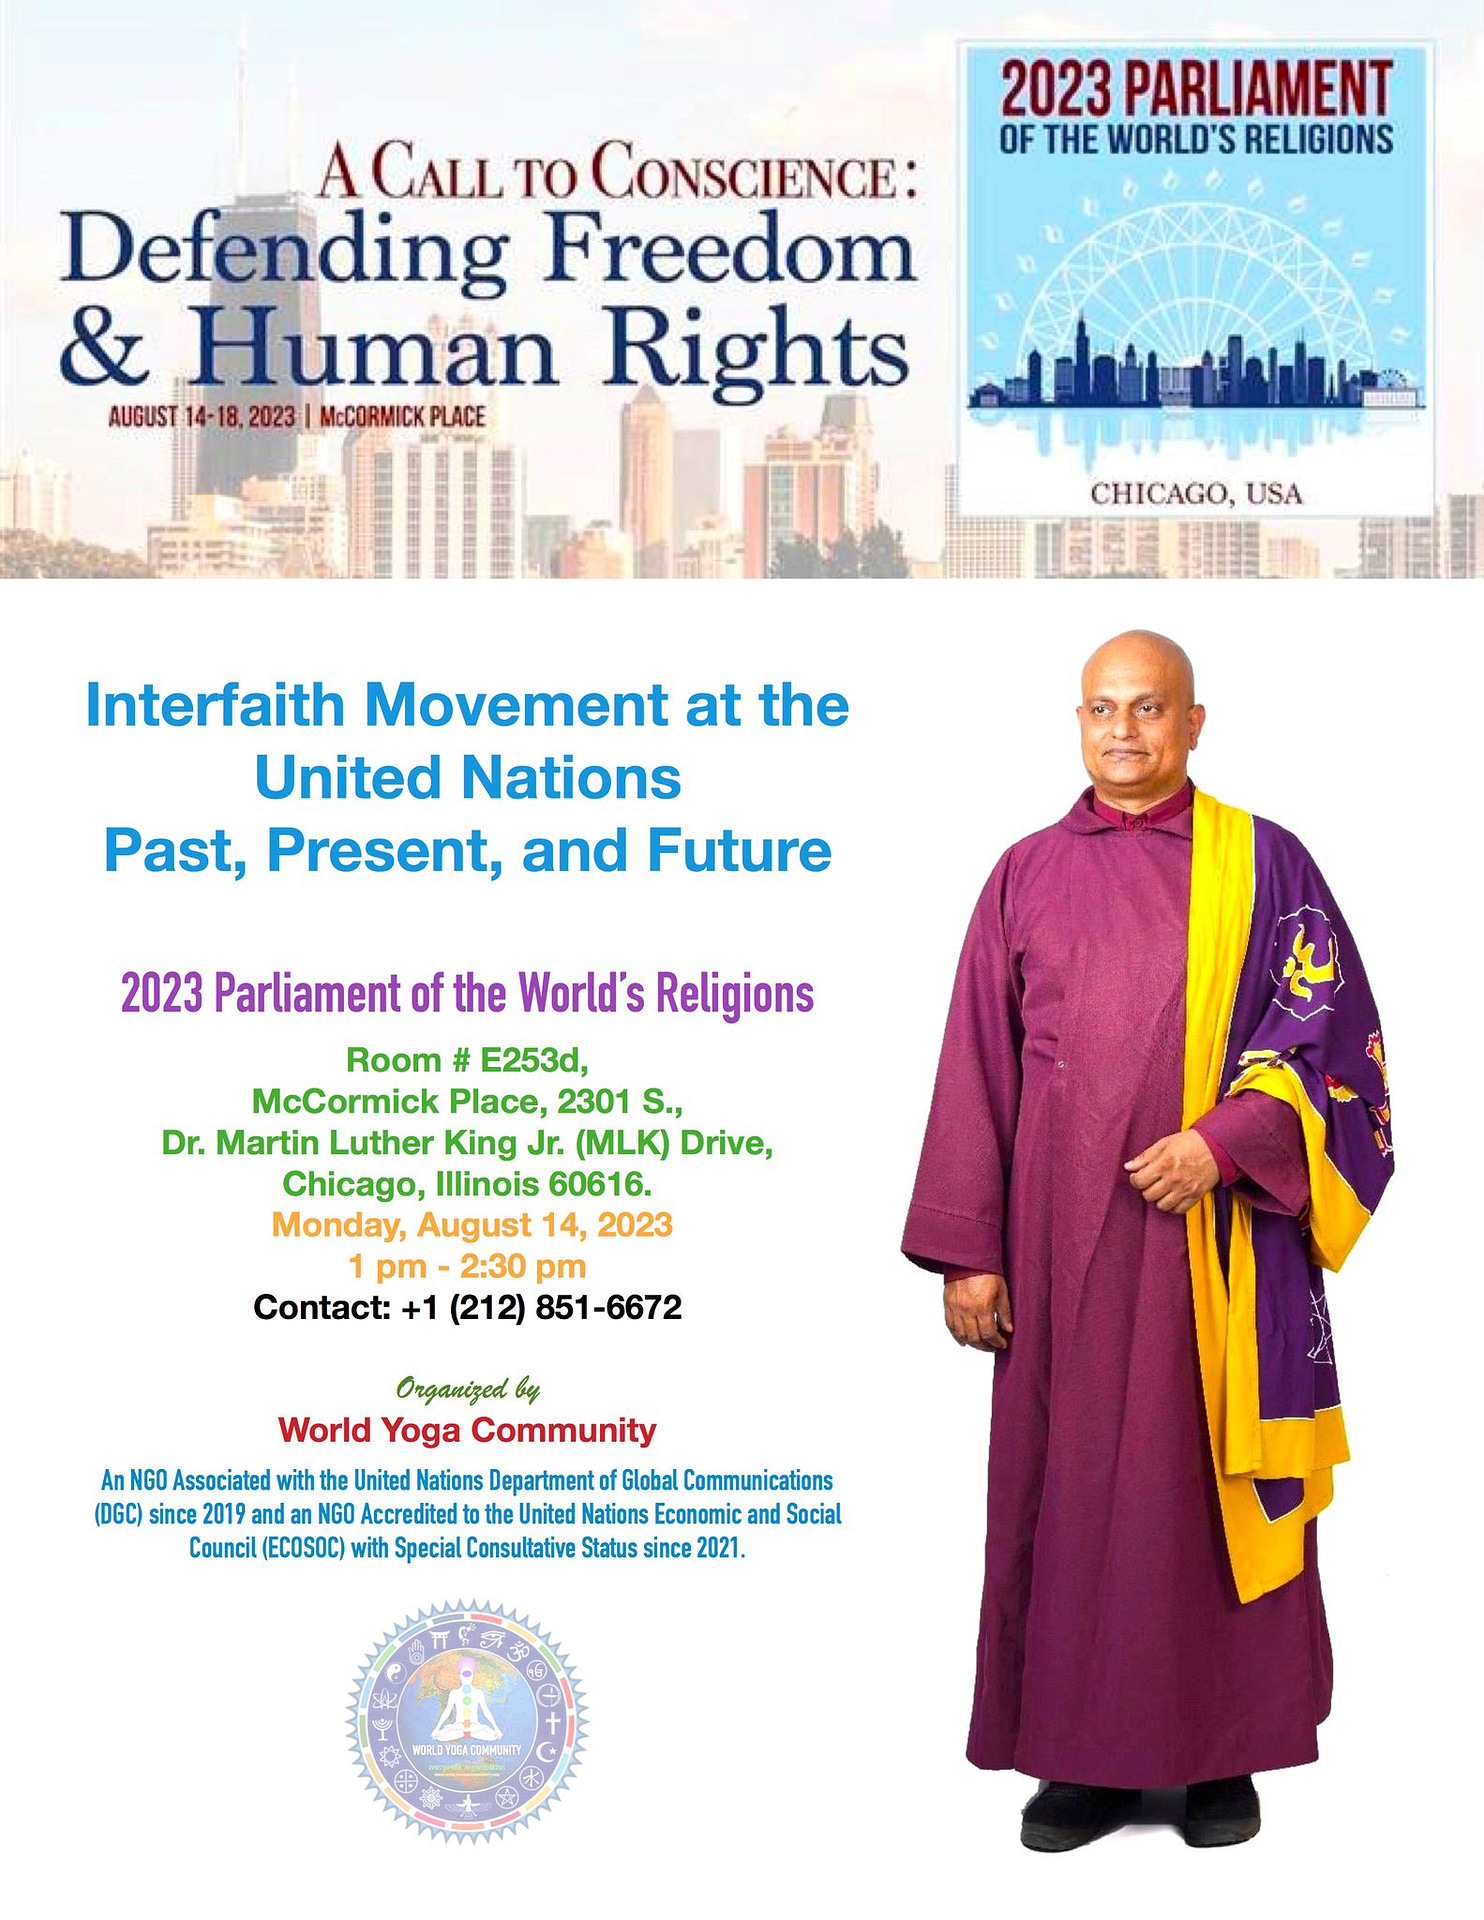 Twelve Gates Leader Guru Dileepji Leads Sessions at the Chicago Parliament of the World’s Religions